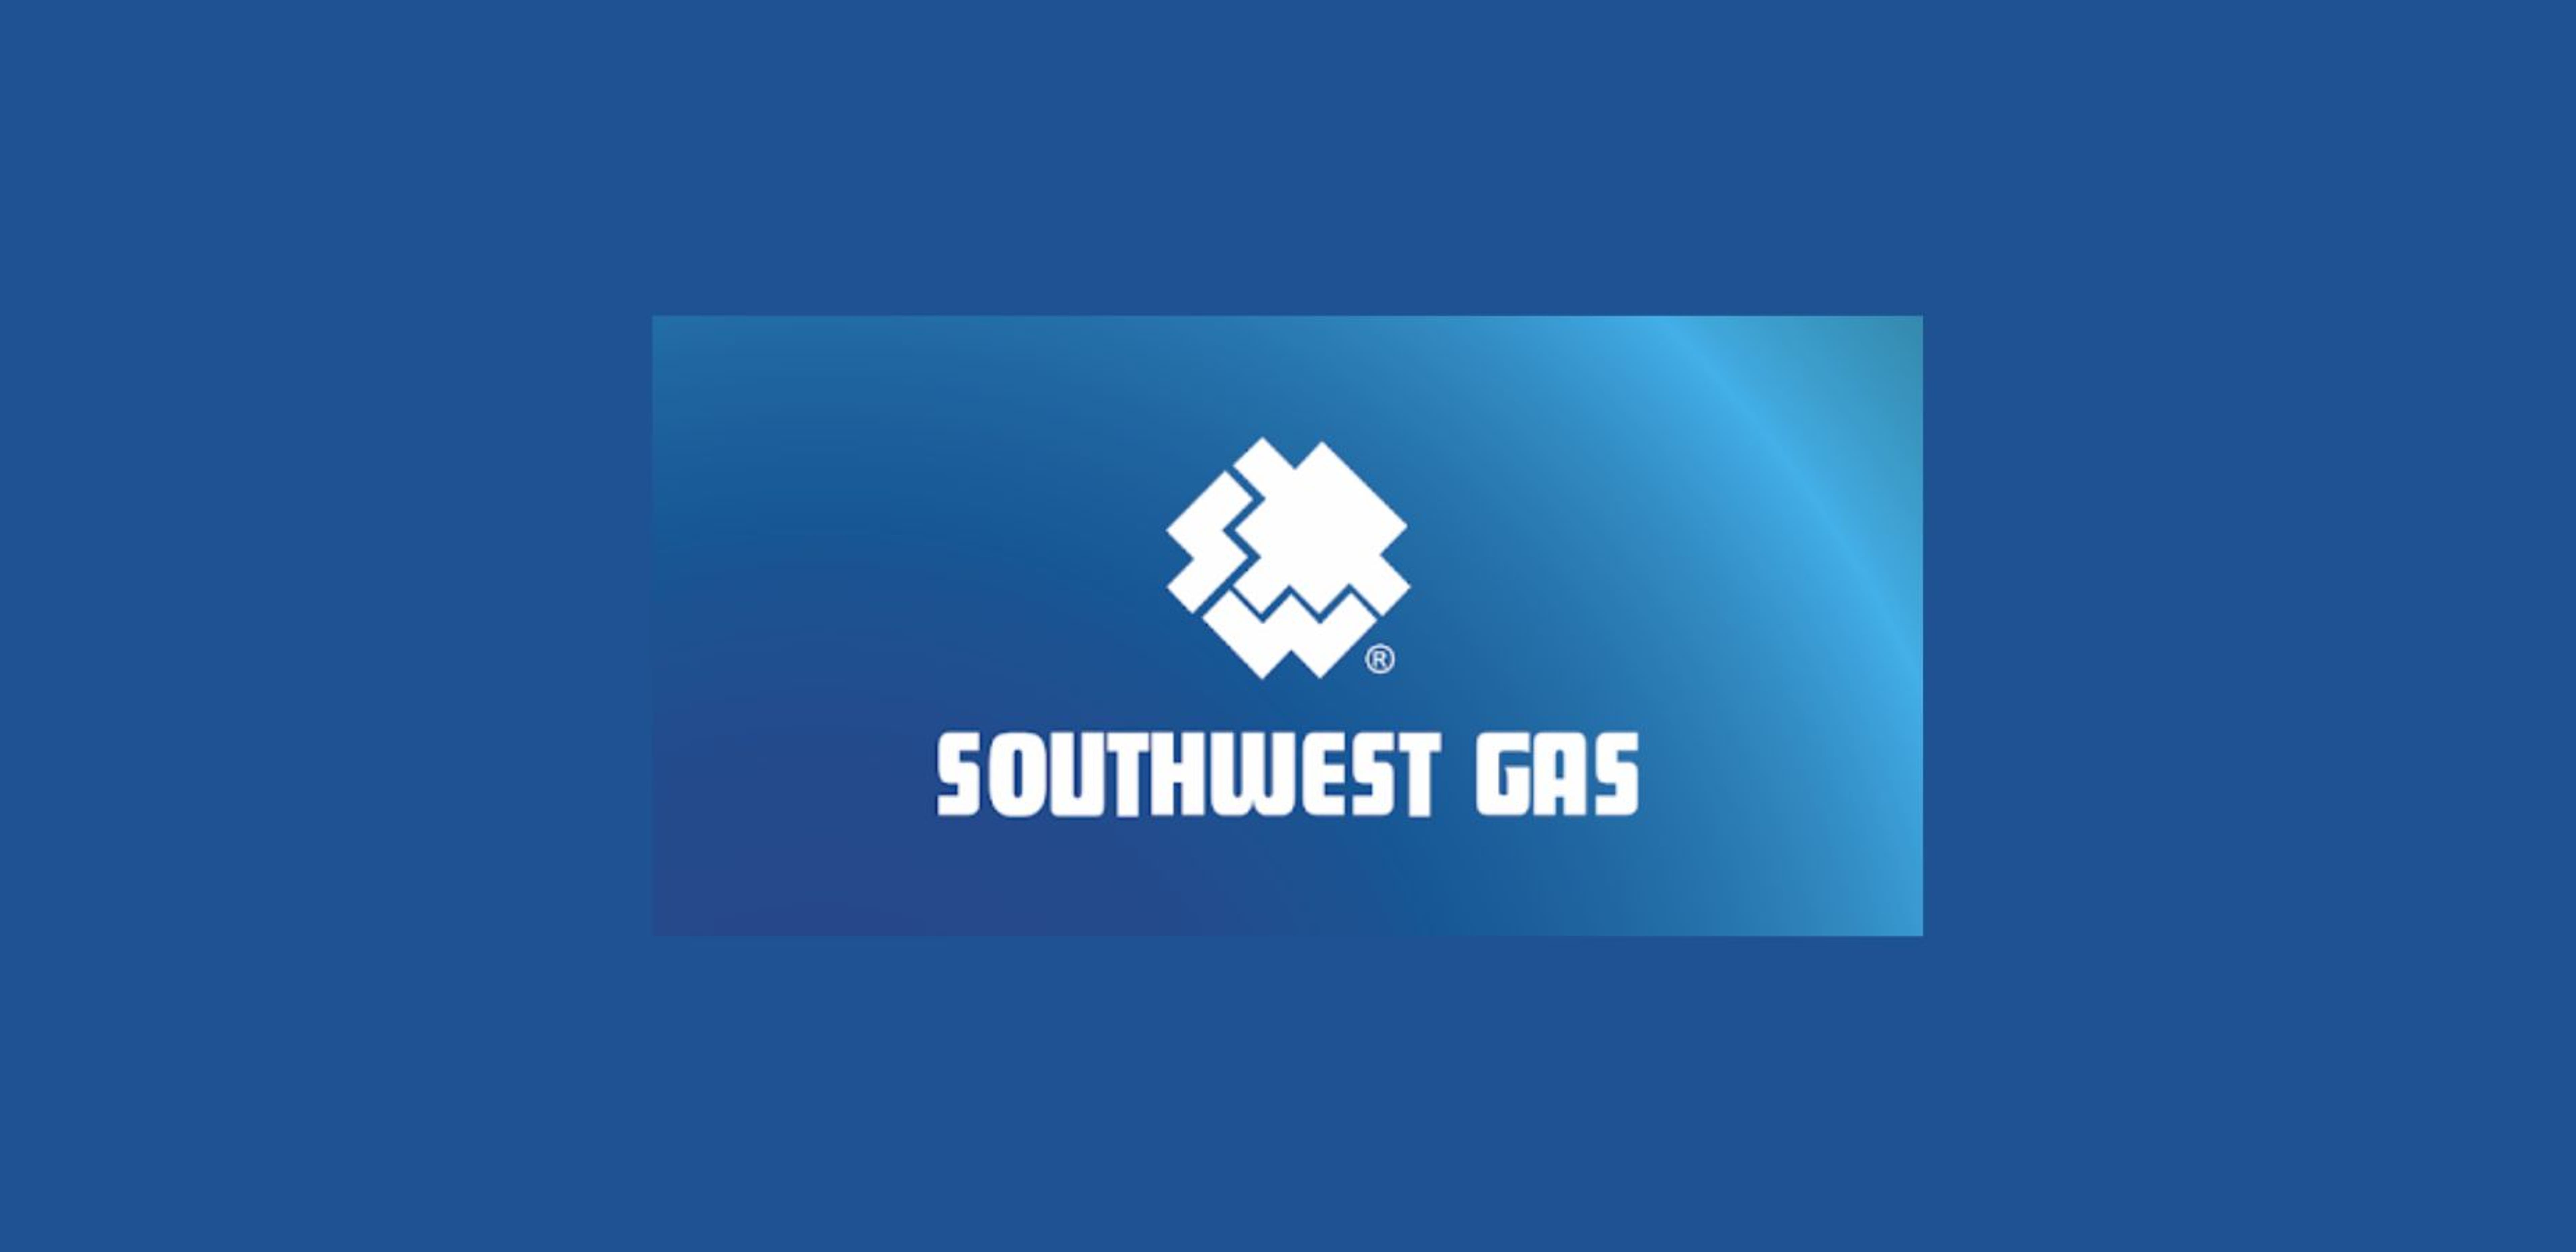 $18.5M Bet On Southwest Gas? Check Out These 3 Stocks Insiders Are Buying